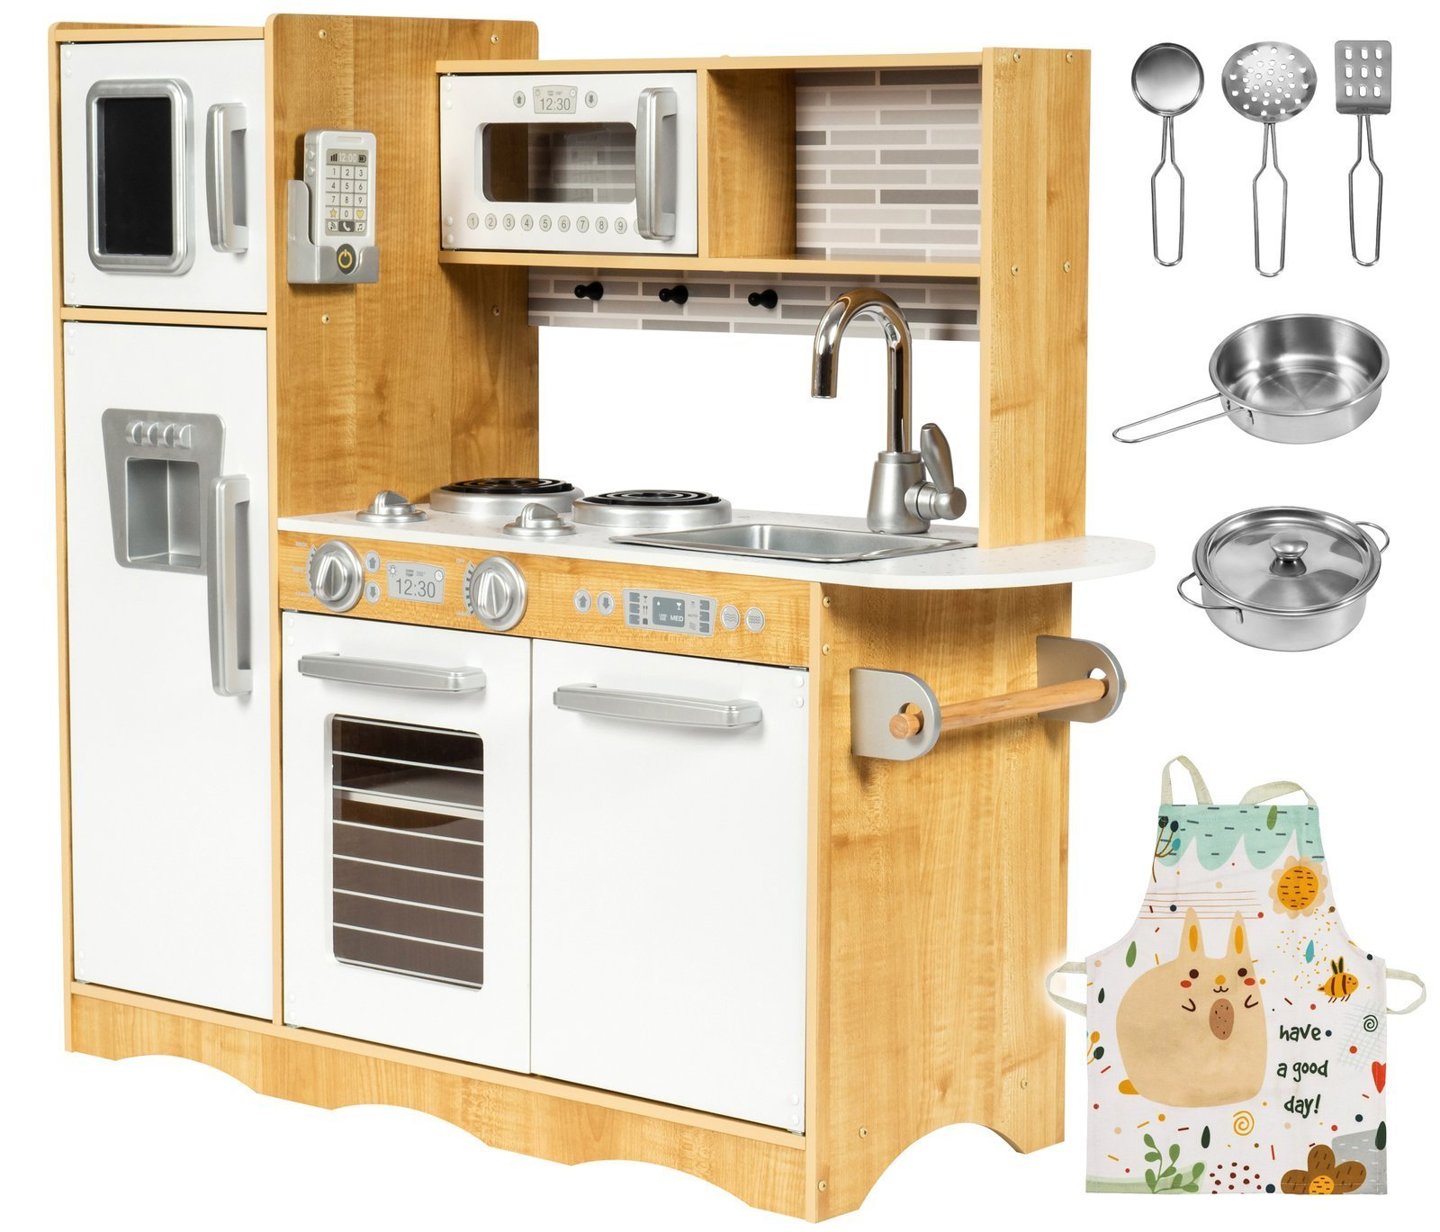 XXL wooden kitchen with LED lighting, apron and accessories